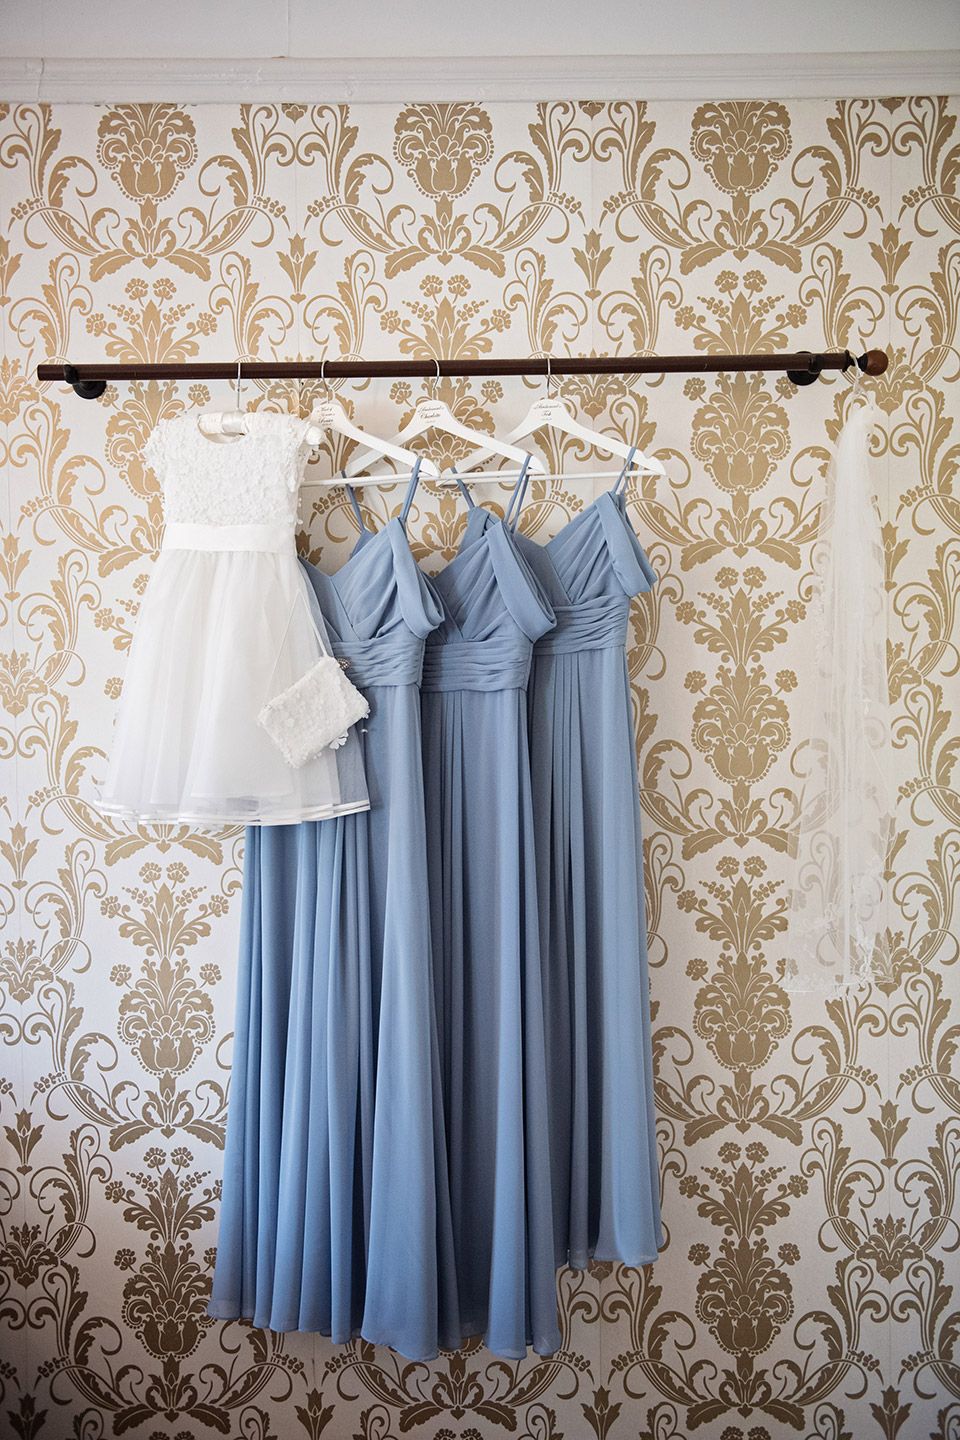 flower girls dress and bridesmaid dresses and veil hang up ready to be worn 